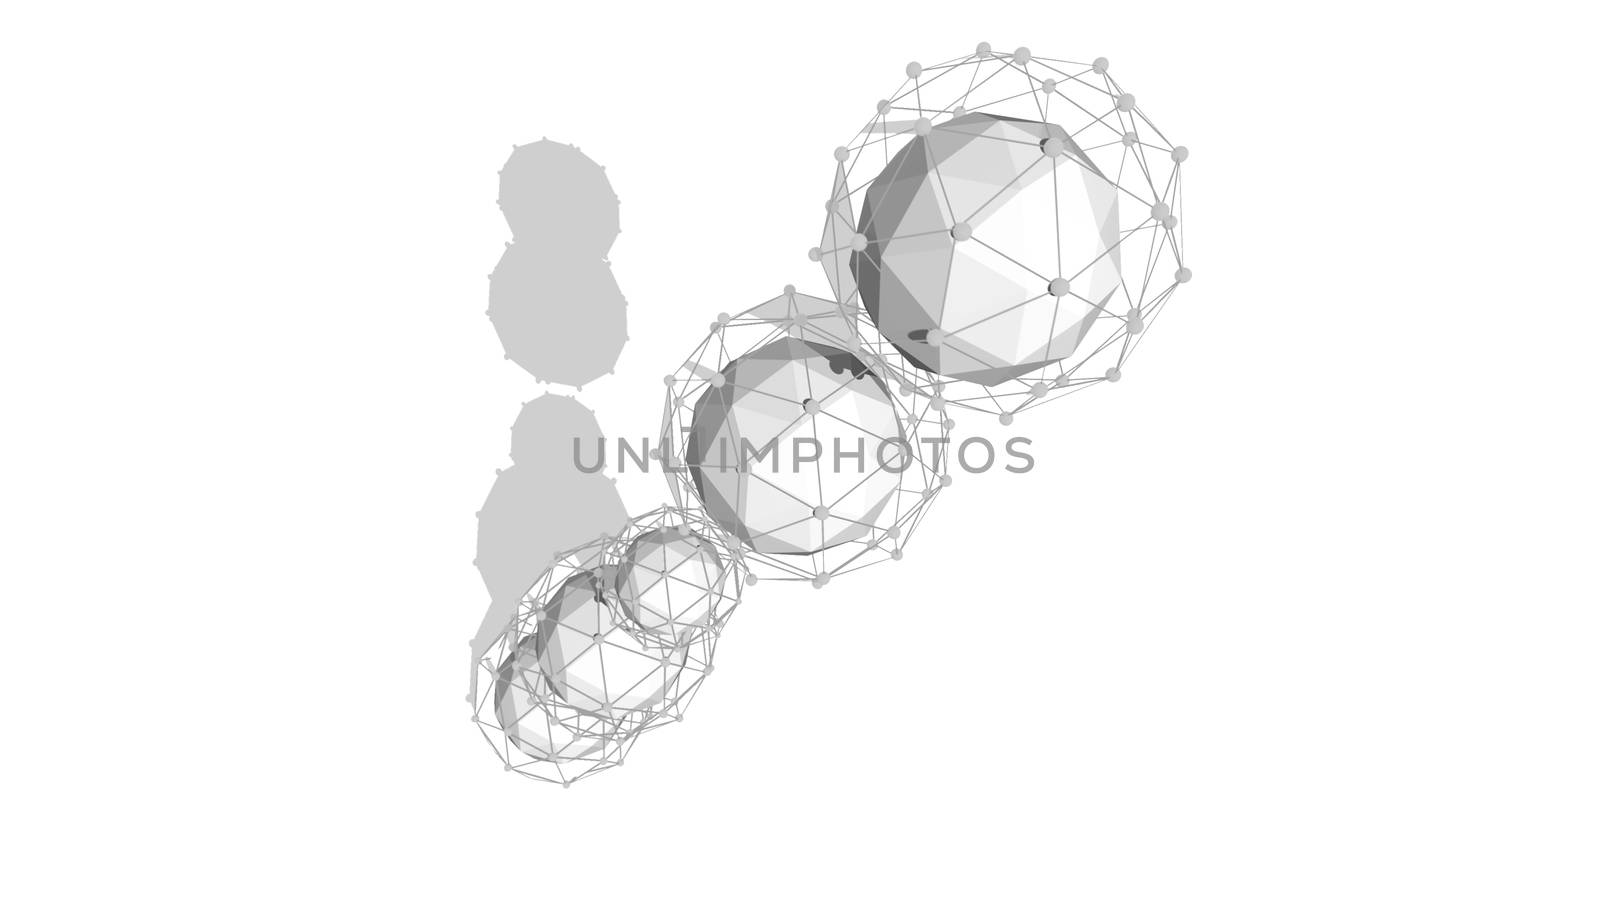 Arty 3d illustration of several spheres covered with network grids placed in one lengthy diagonal line in the white background. They look impressive, artistic and optimistic. 